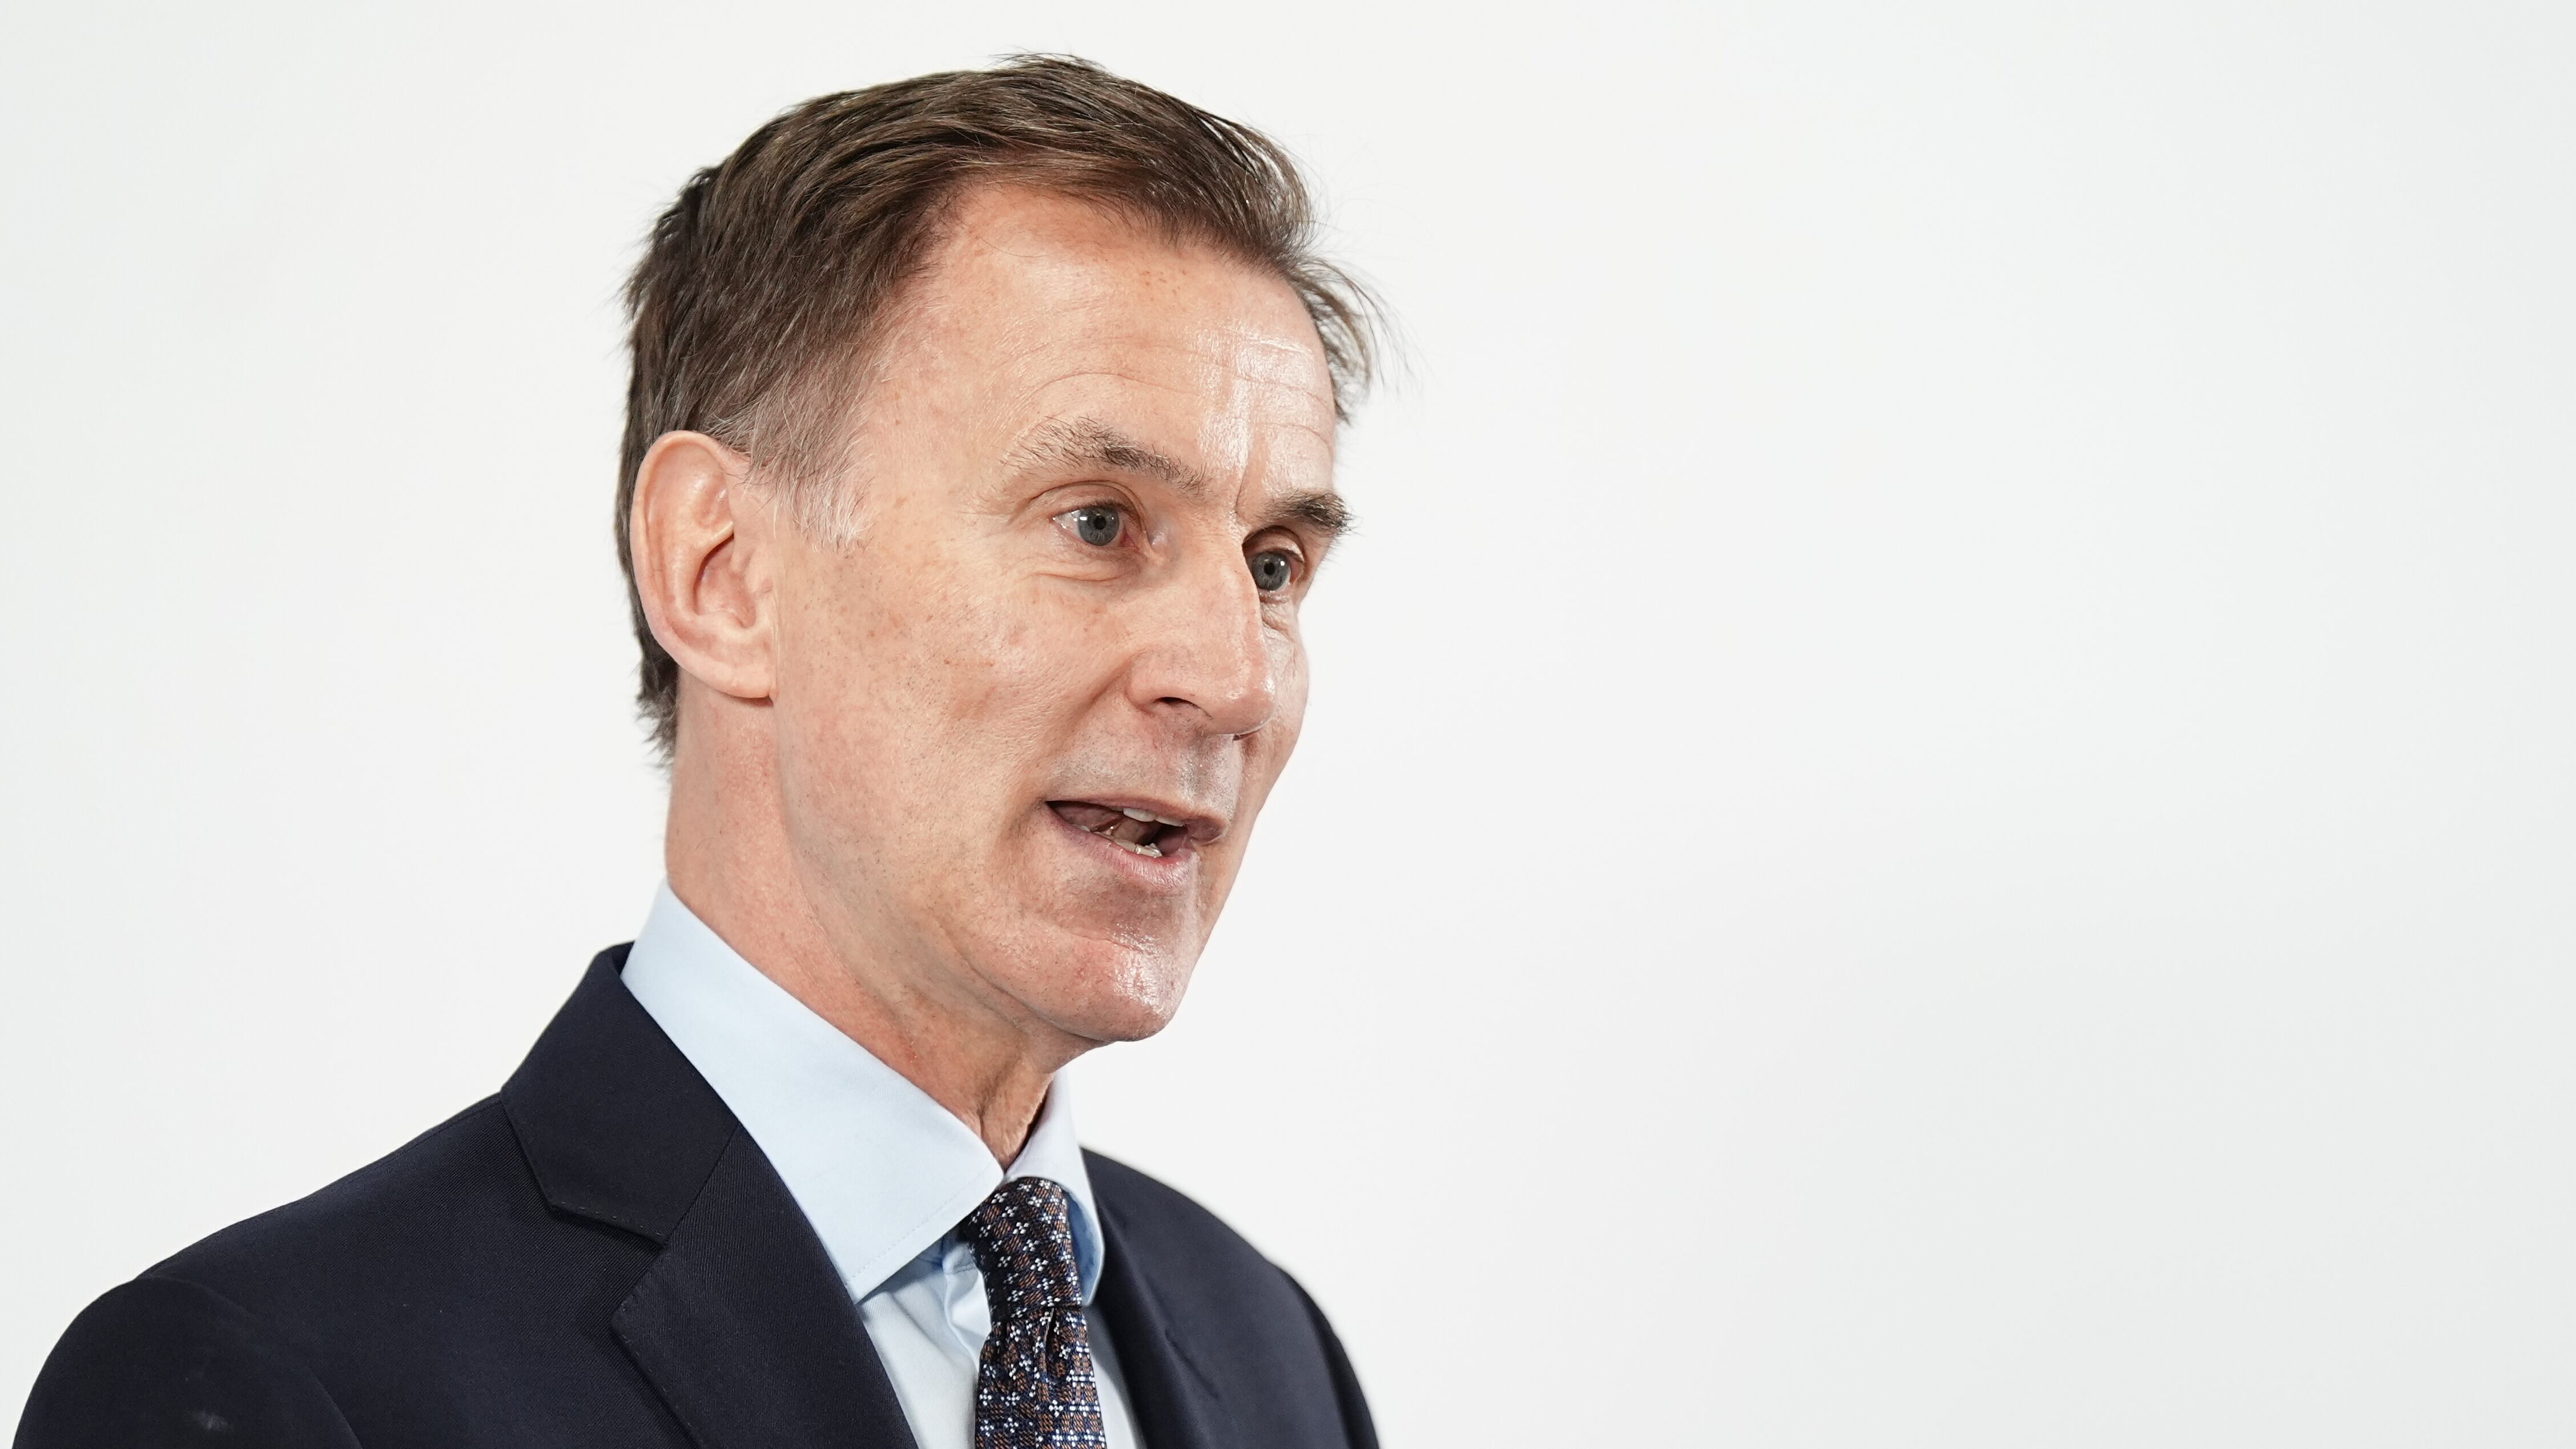 Chancellor Jeremy Hunt admitted there is ‘frustration’ with the Tory record